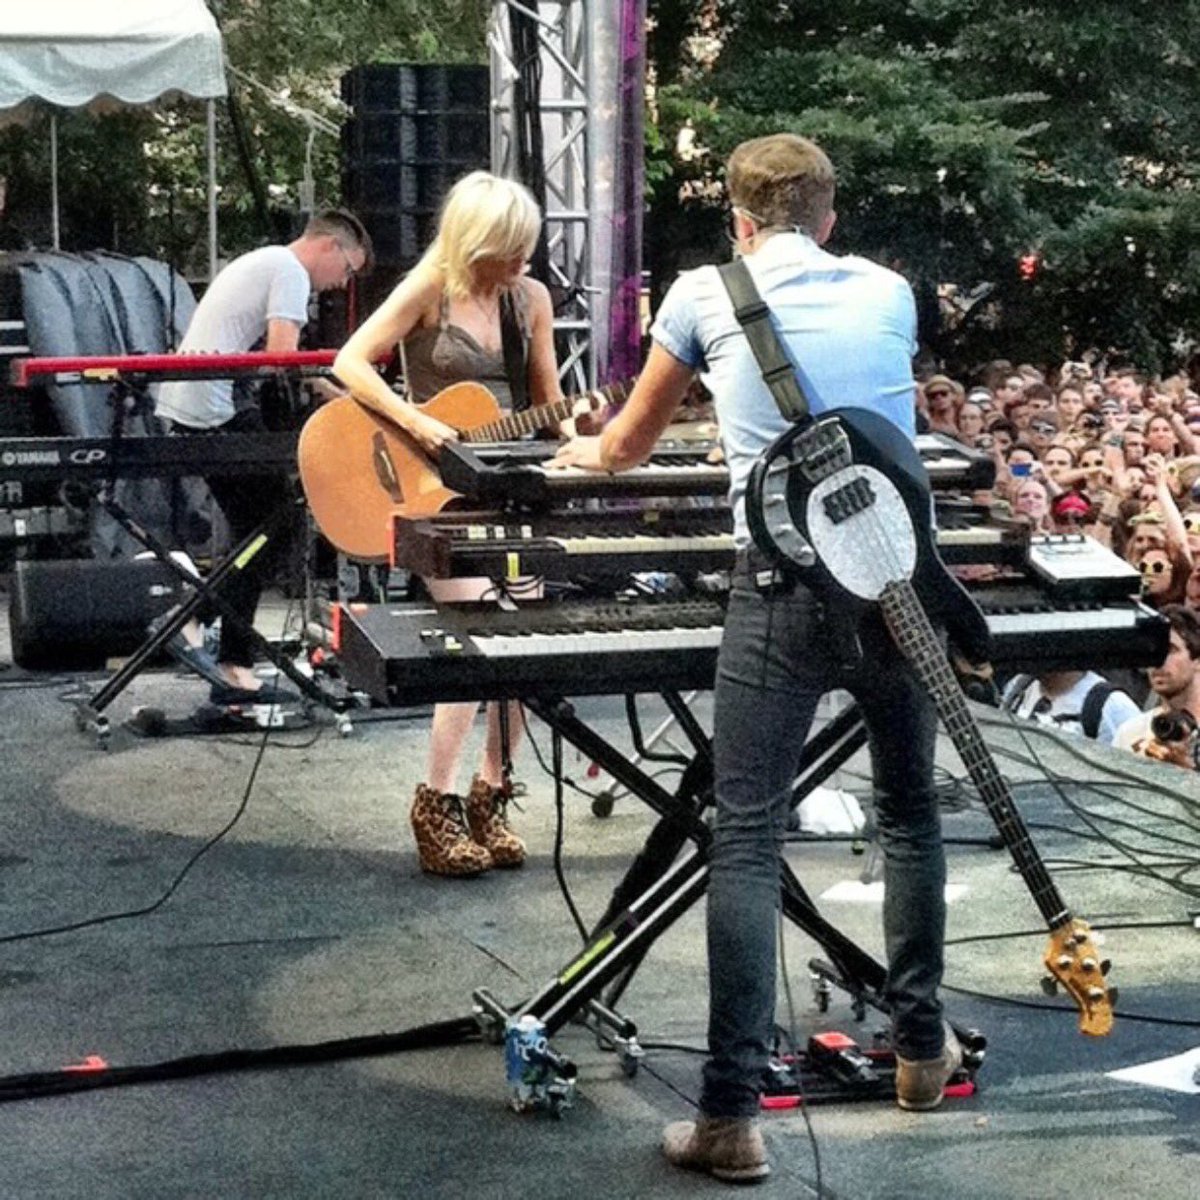 RT @carlryan: 5 years ago today when @elliegoulding was on the small stage at Lolla vs last Sunday main stage #ElliePalooza https://t.co/fH…